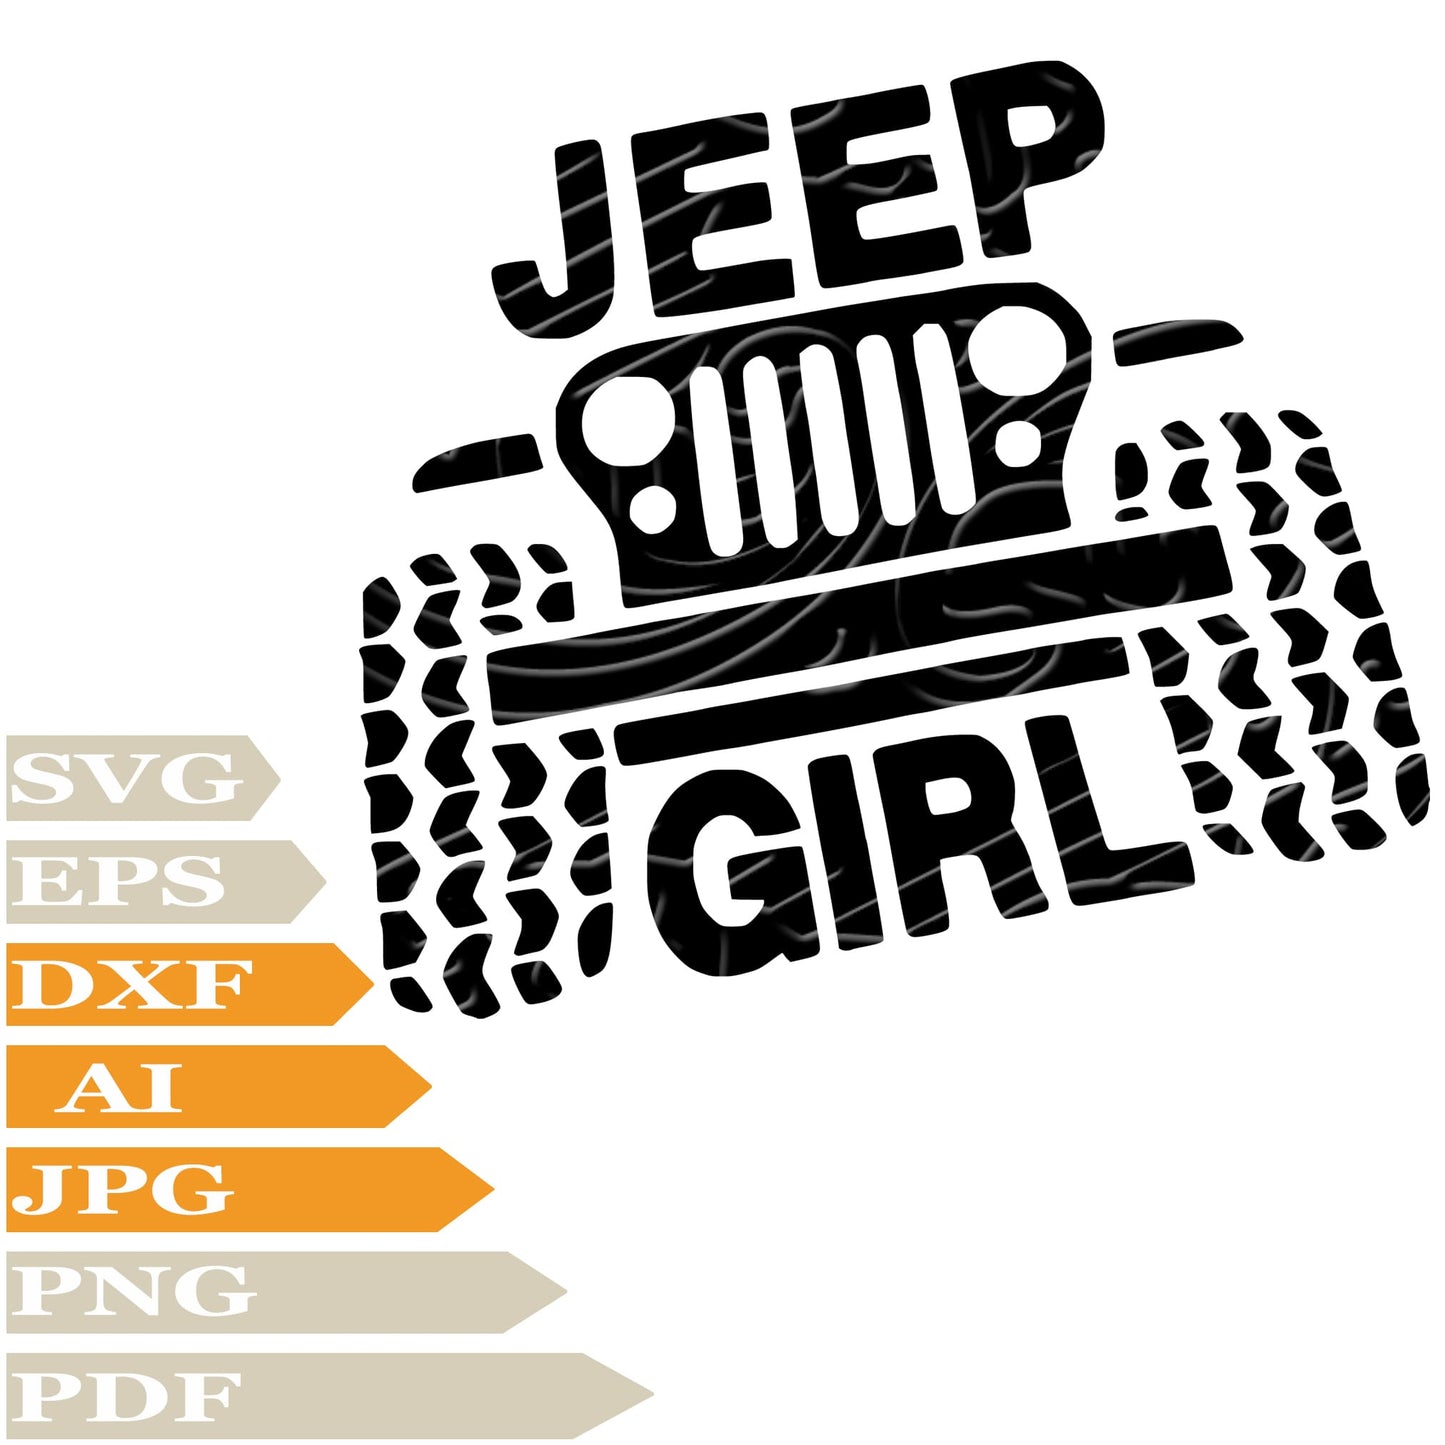 Jeep,Jeep Girl Svg File, Image Cut, Png, For Tattoo, Silhouette, Digital Vector Download, Cut File, Clipart, For Cricut